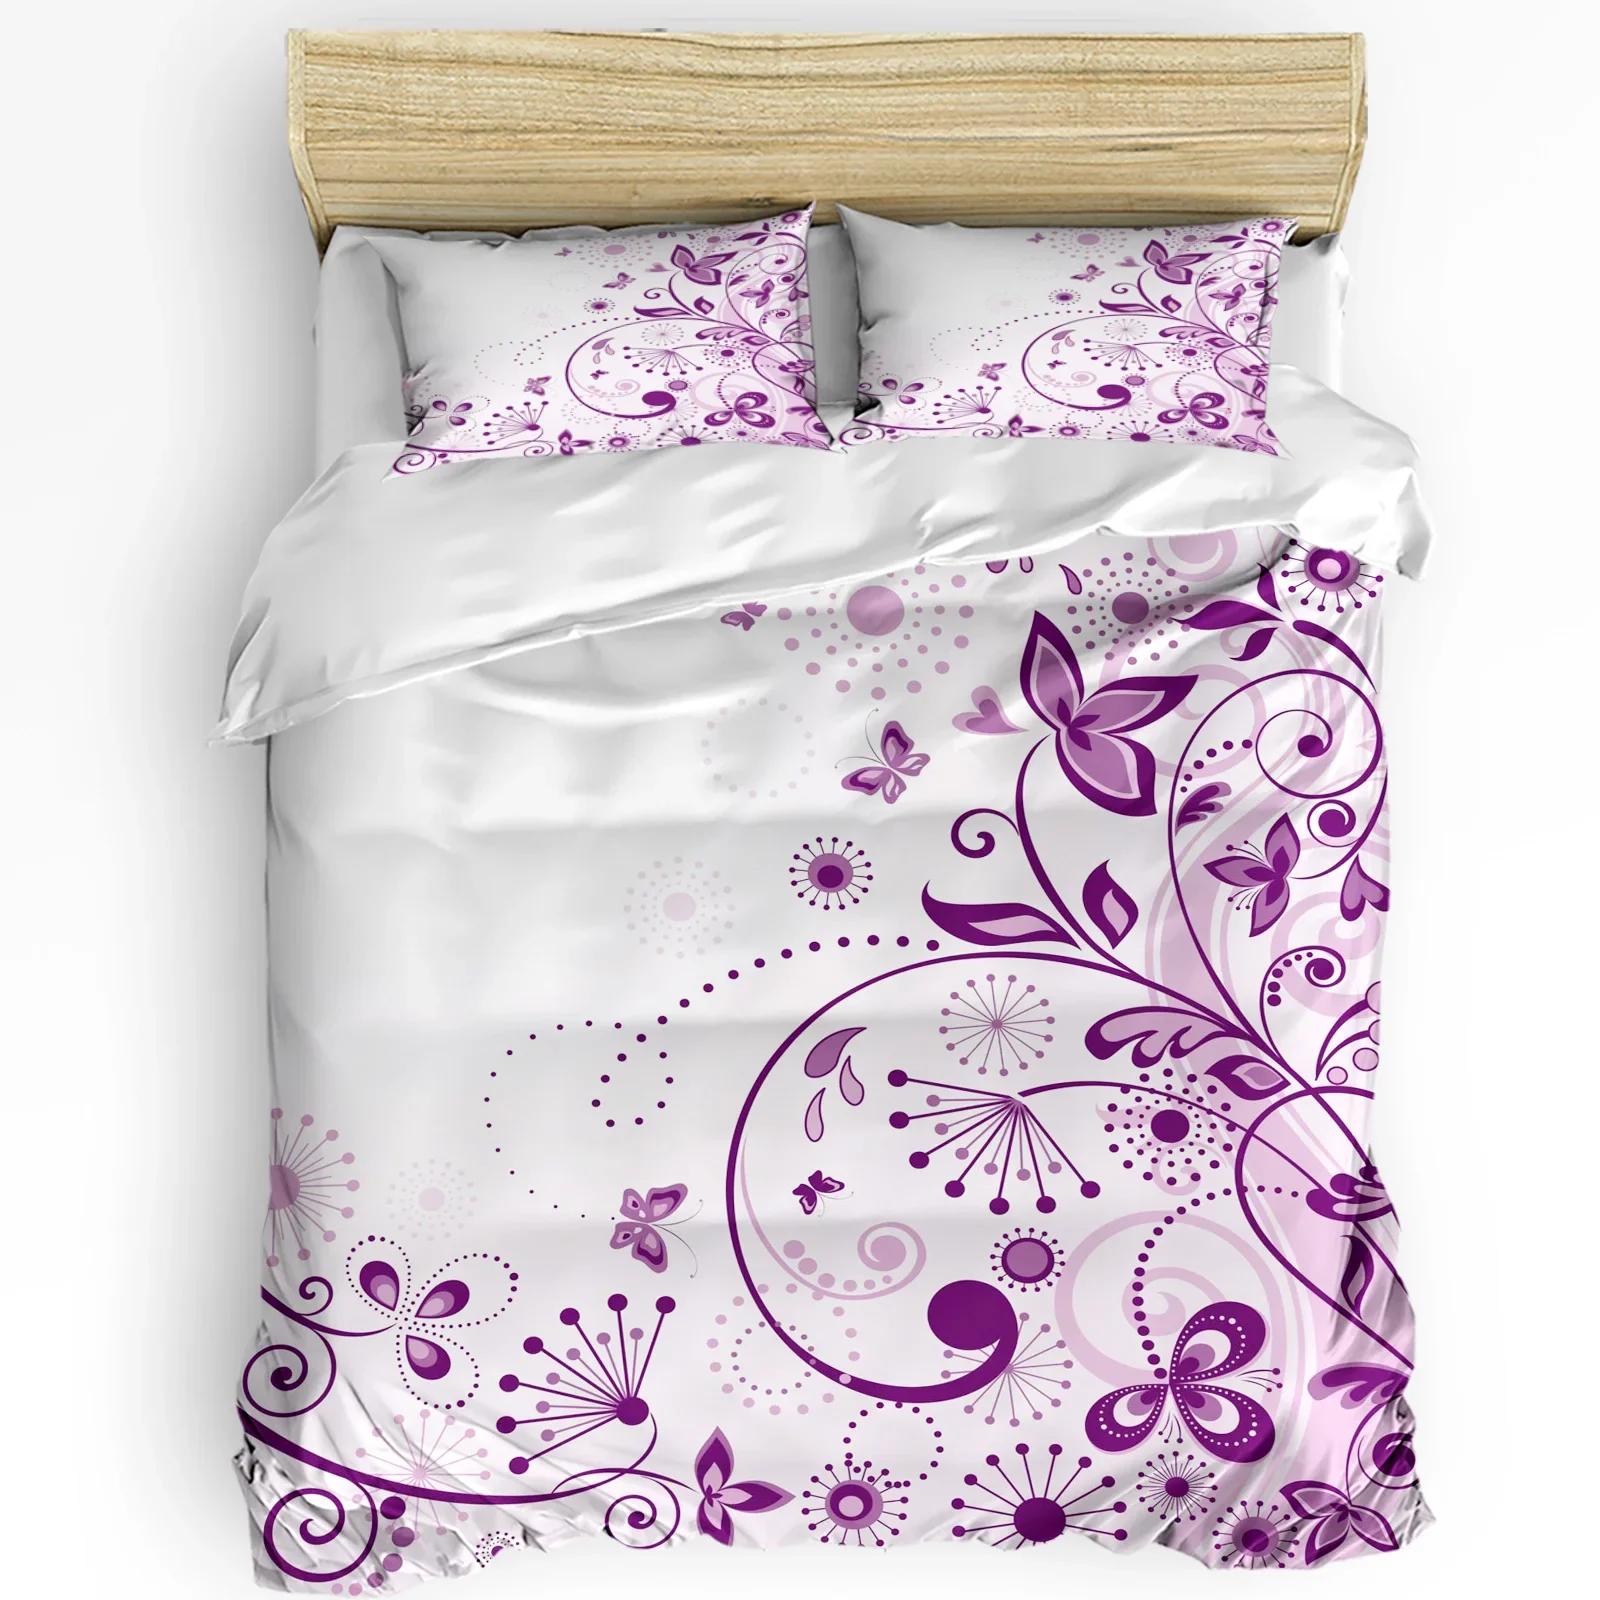 Flowers Butterfly Branches Purple White 3pcs Bedding Set For Bedroom Double Bed Home Textile Duvet Cover Quilt Cover